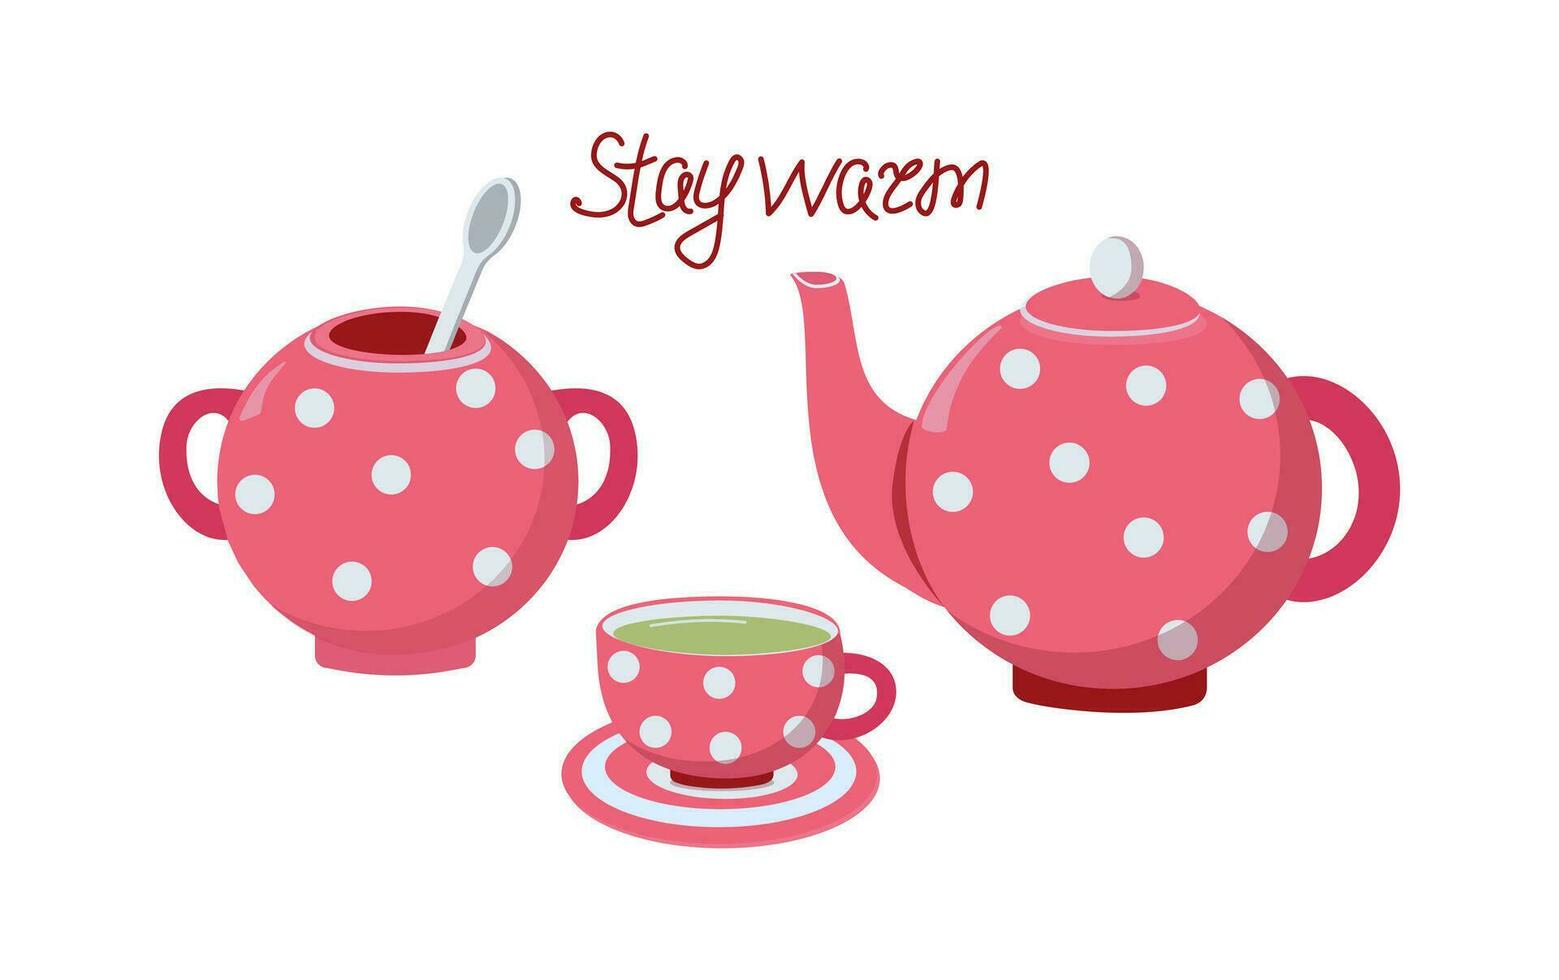 Kettle, tea, sugar bowl. Set of dishes for tea drinking. Tea in a cup. Hot drink. vector